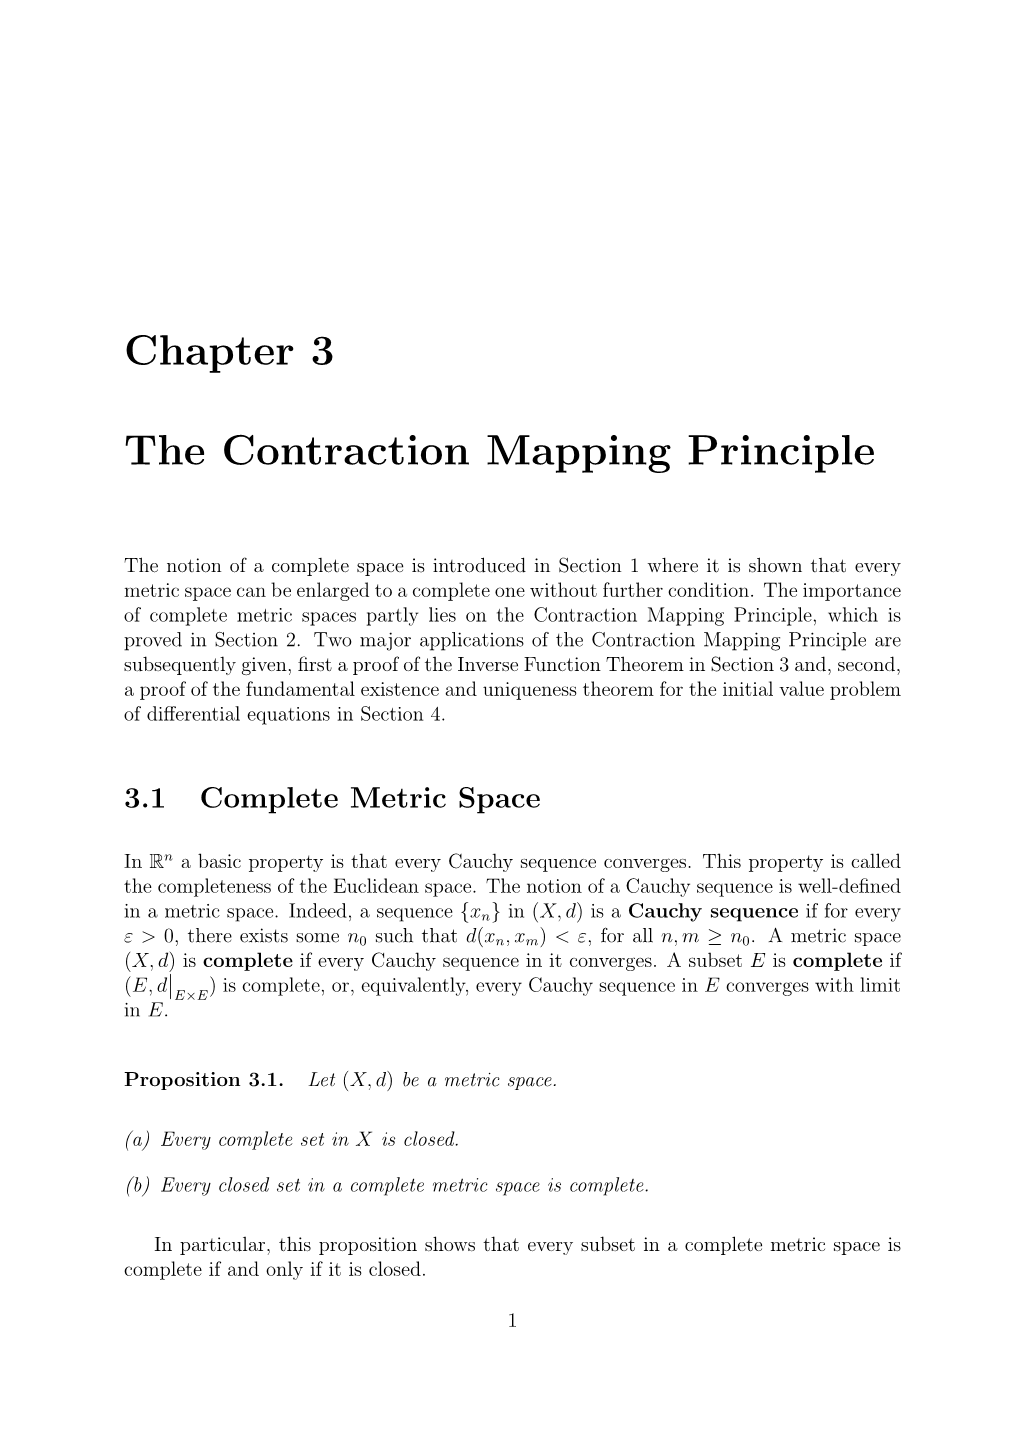 Chapter 3 the Contraction Mapping Principle